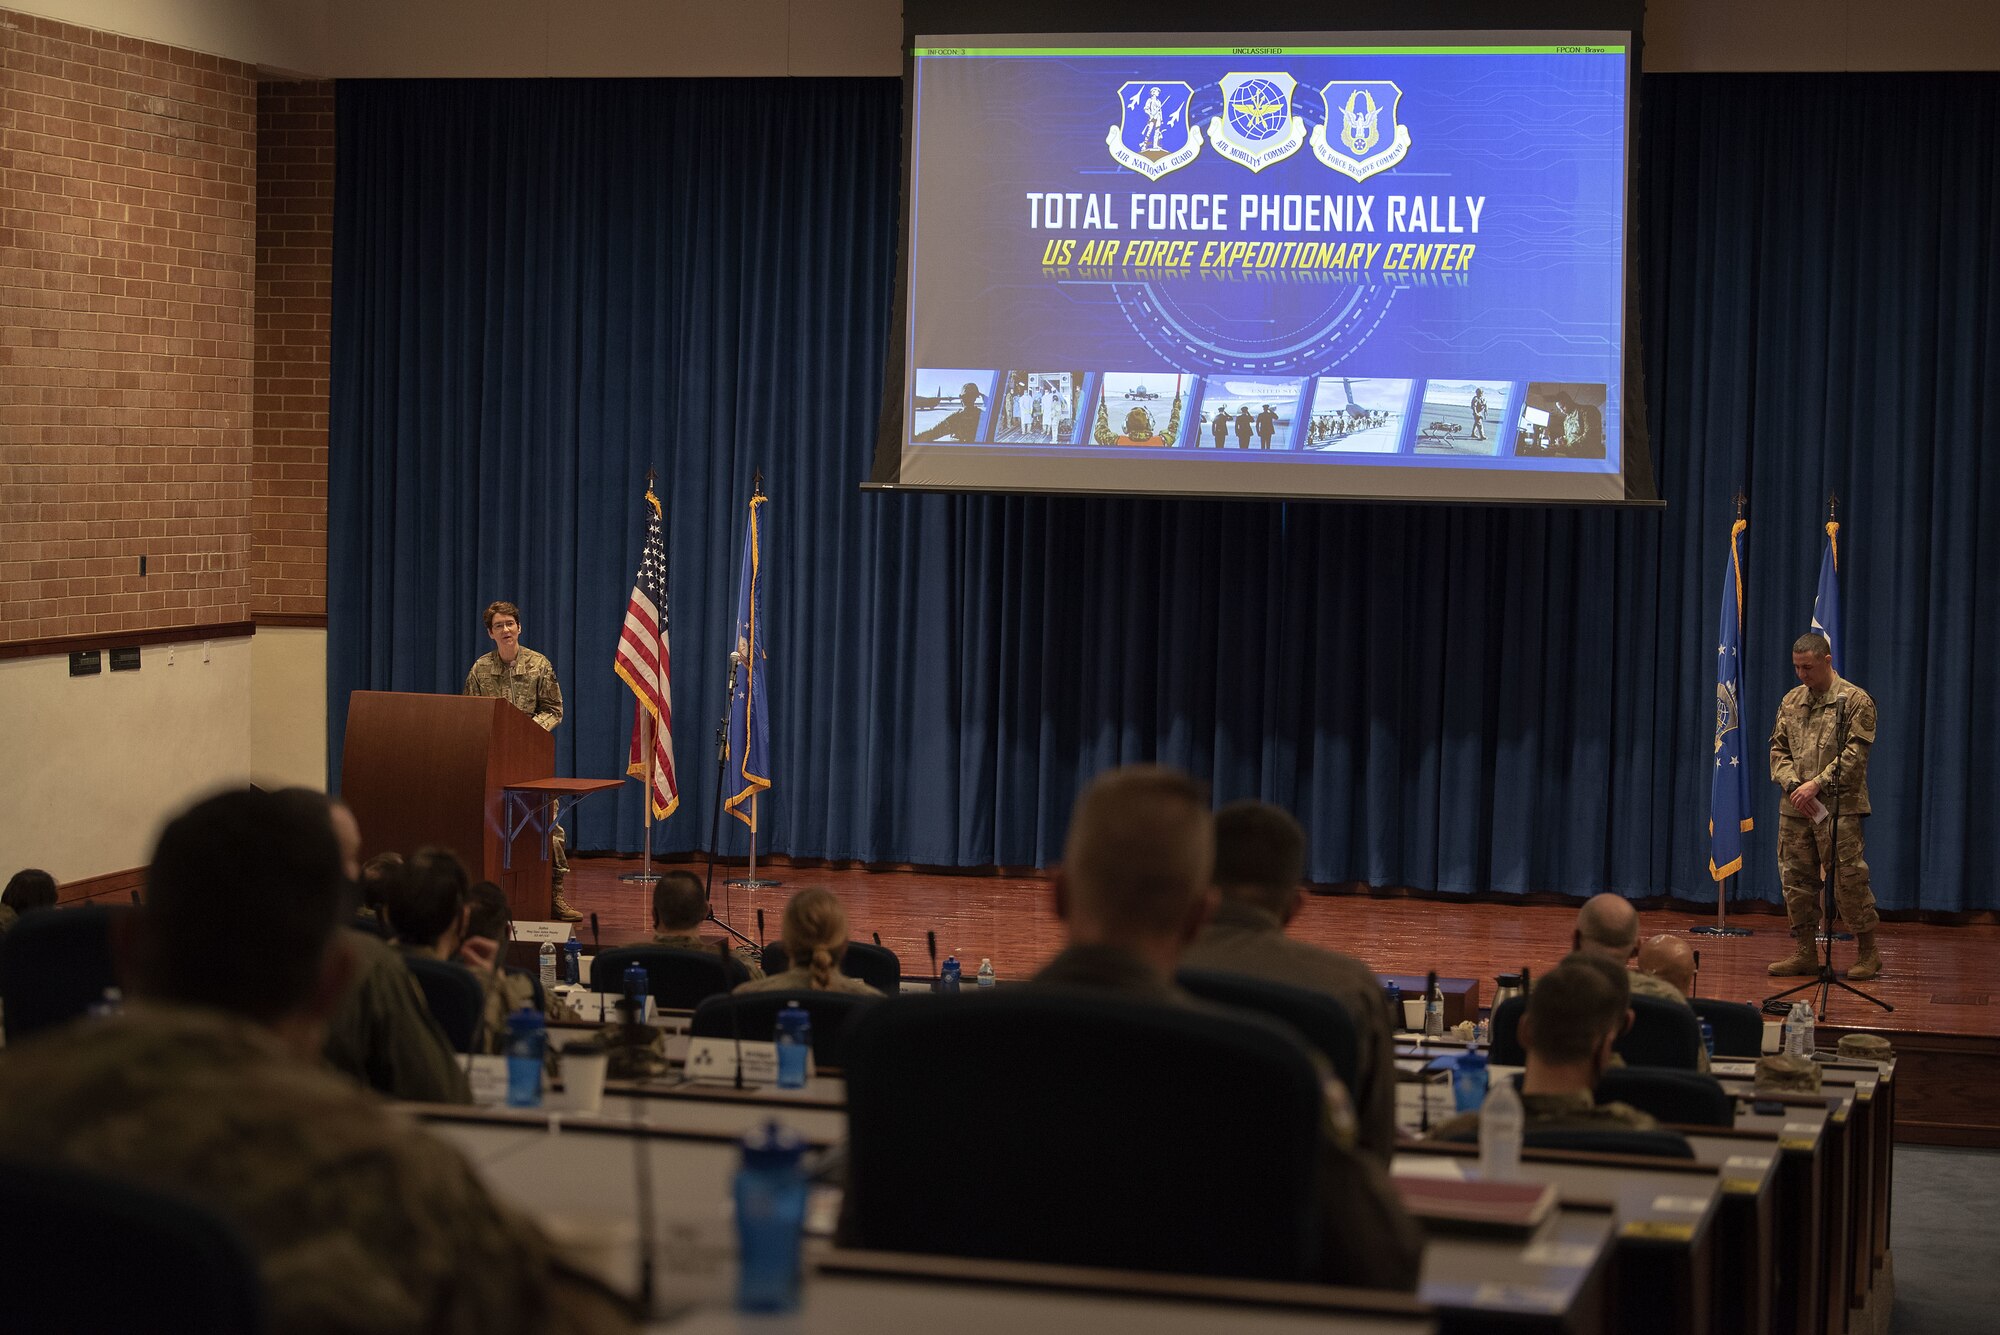 U.S. Air Force Gen. Jacqueline Van Ovost, Air Mobility Command commander, gives opening remarks with U.S. Air Force Chief Master Sgt. Brian Kruzelnick, AMC command chief, during Total Force Phoenix Rally, April 20, 2021, at the U.S. Air Force Expeditionary Center headquarters on Joint Base McGuire-Dix-Lakehurst, New Jersey. The event allows leadership across the Total Force Mobility Air Forces to discuss their perspectives and how they support AMC’s priorities: develop the force, advance warfighting capabilities, project the joint force and ensure strategic deterrence. (U.S. Air Force photo by Master Sgt. Ashley Hyatt)